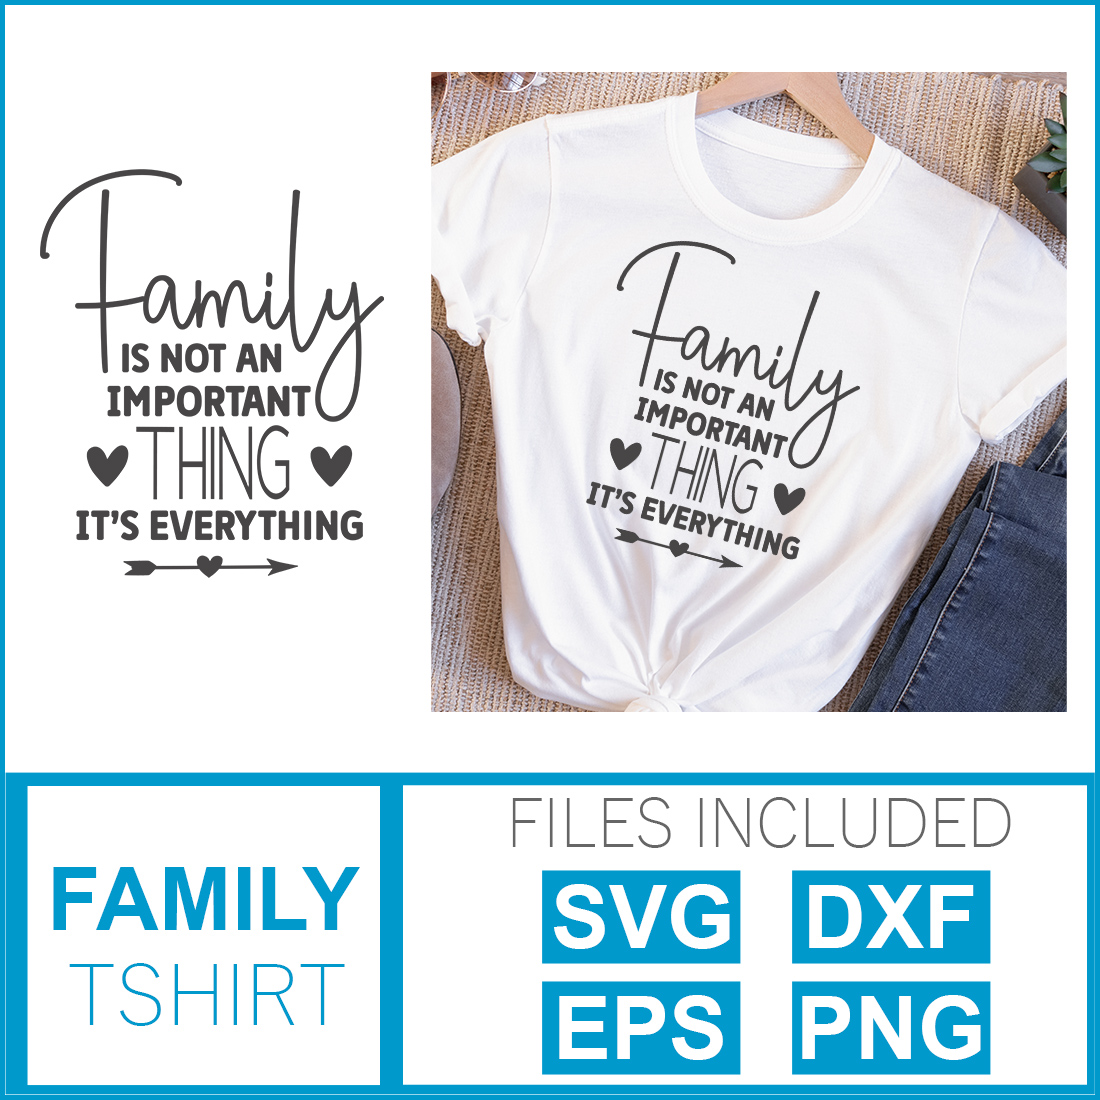 Image of a white T-shirt with a beautiful inscription "family is not an important thing its everything".